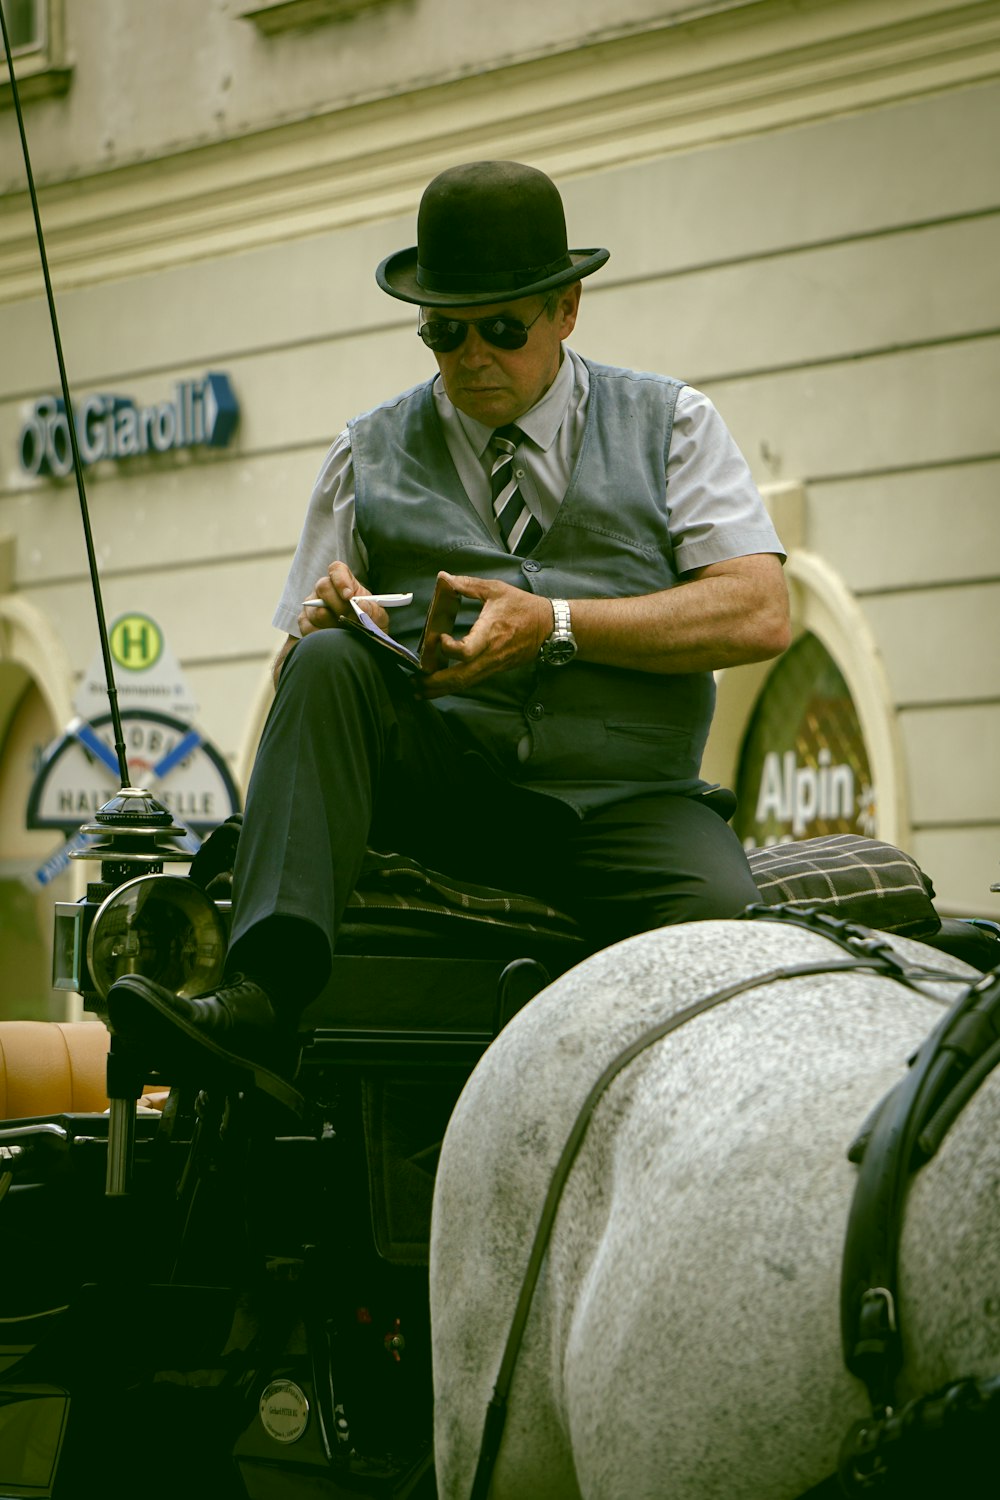 man in gray polo shirt and green hat sitting on black motorcycle during daytime